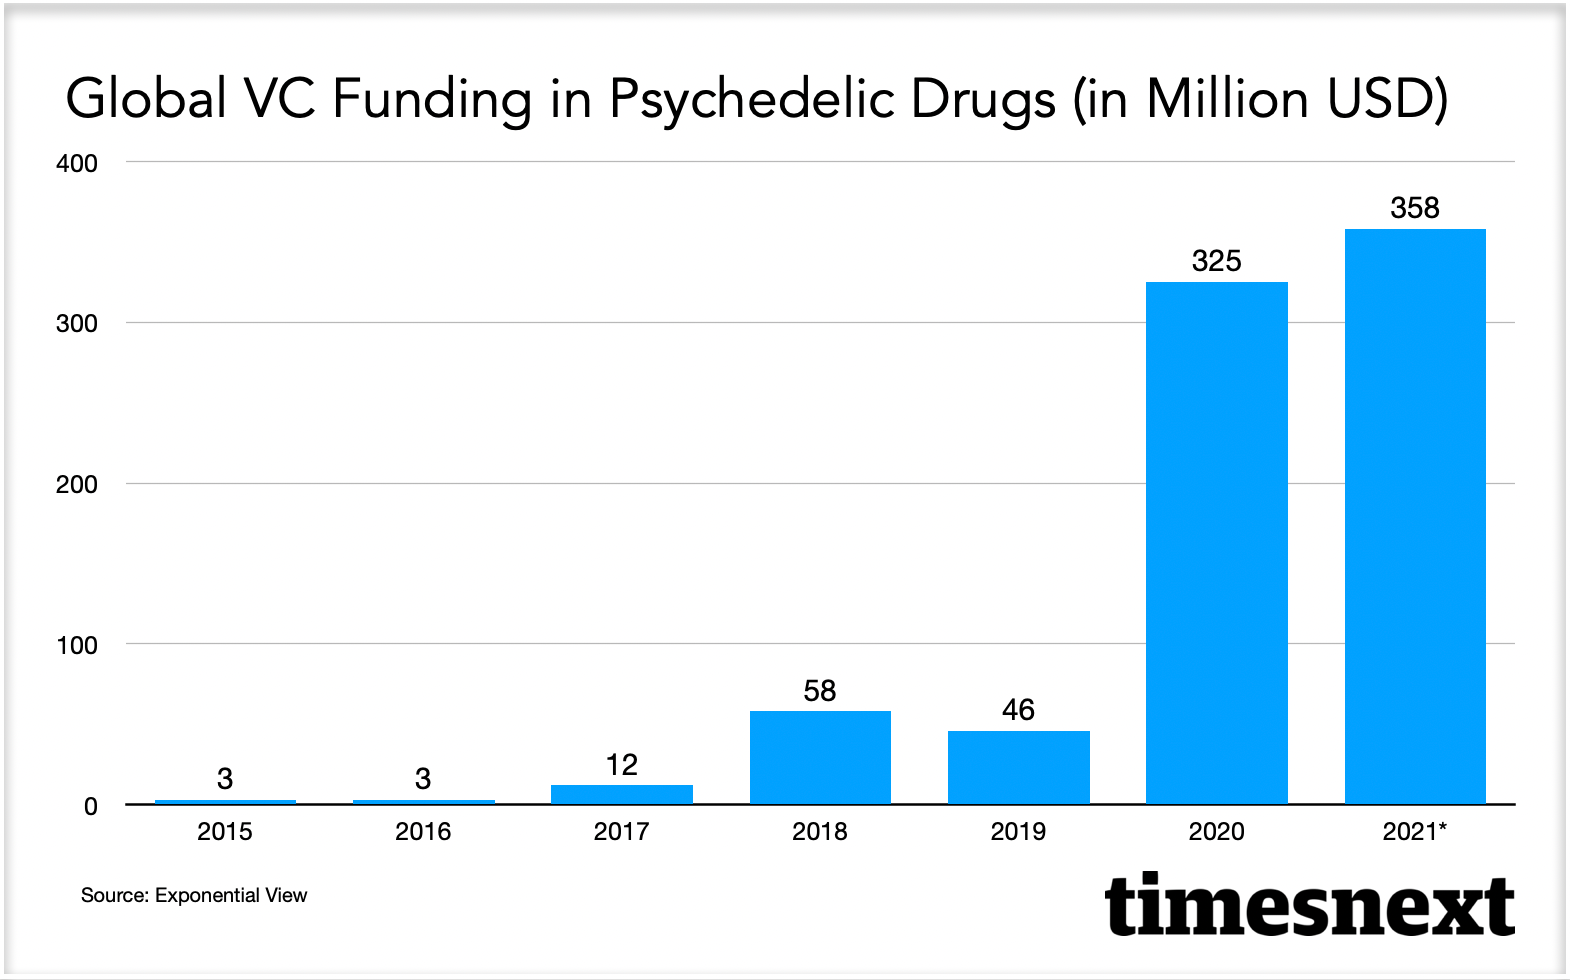 Global VC Funding in Psychedelic Drugs